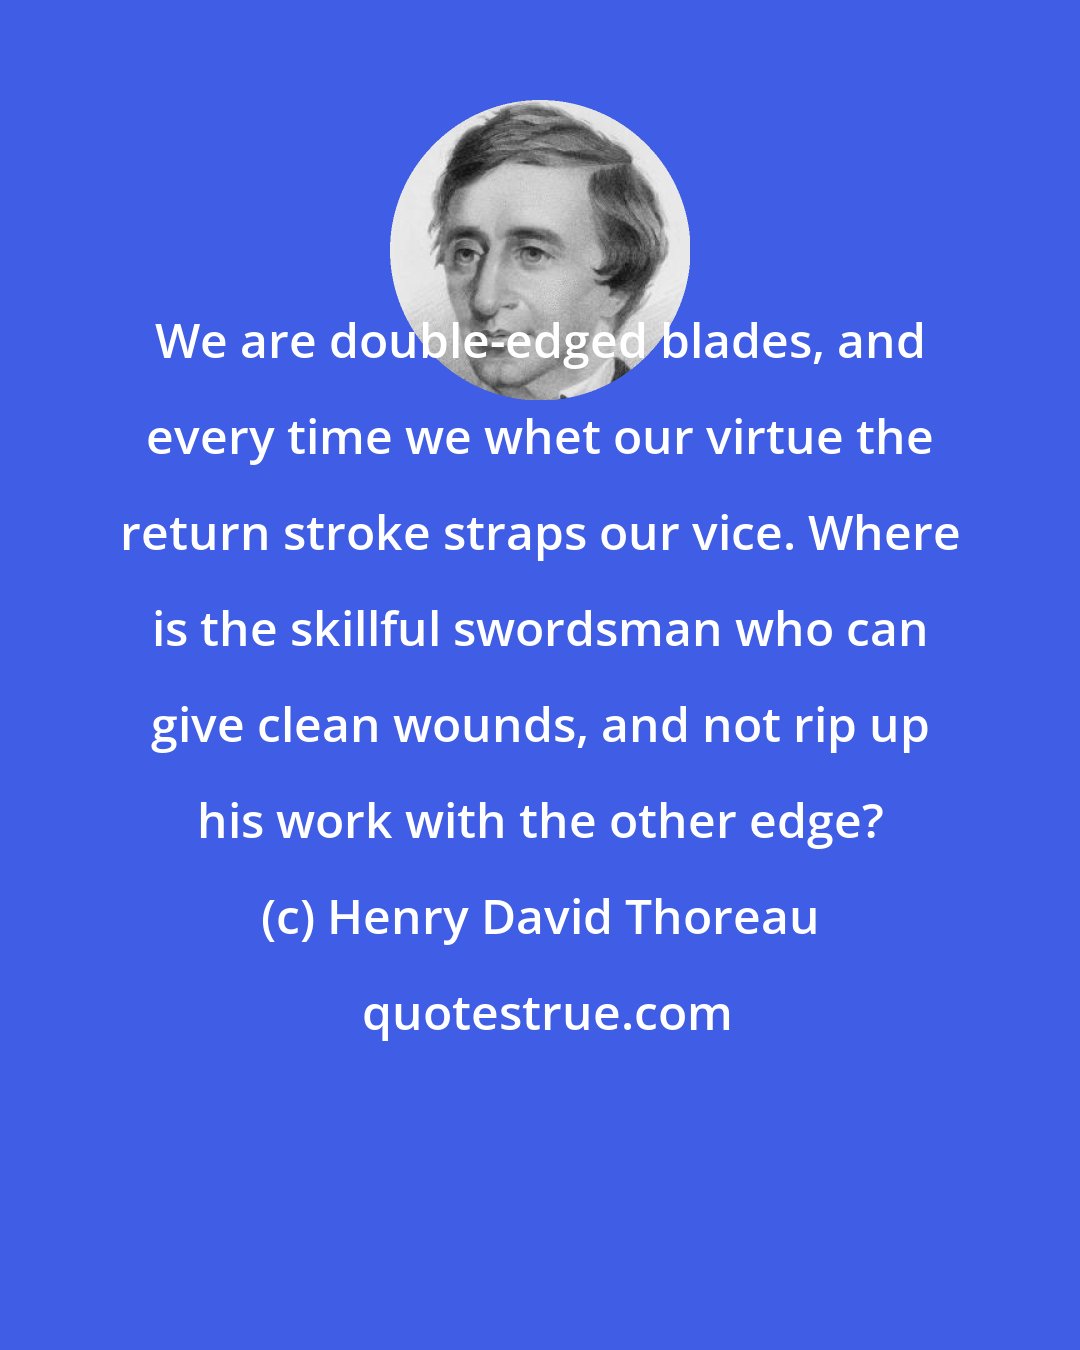 Henry David Thoreau: We are double-edged blades, and every time we whet our virtue the return stroke straps our vice. Where is the skillful swordsman who can give clean wounds, and not rip up his work with the other edge?